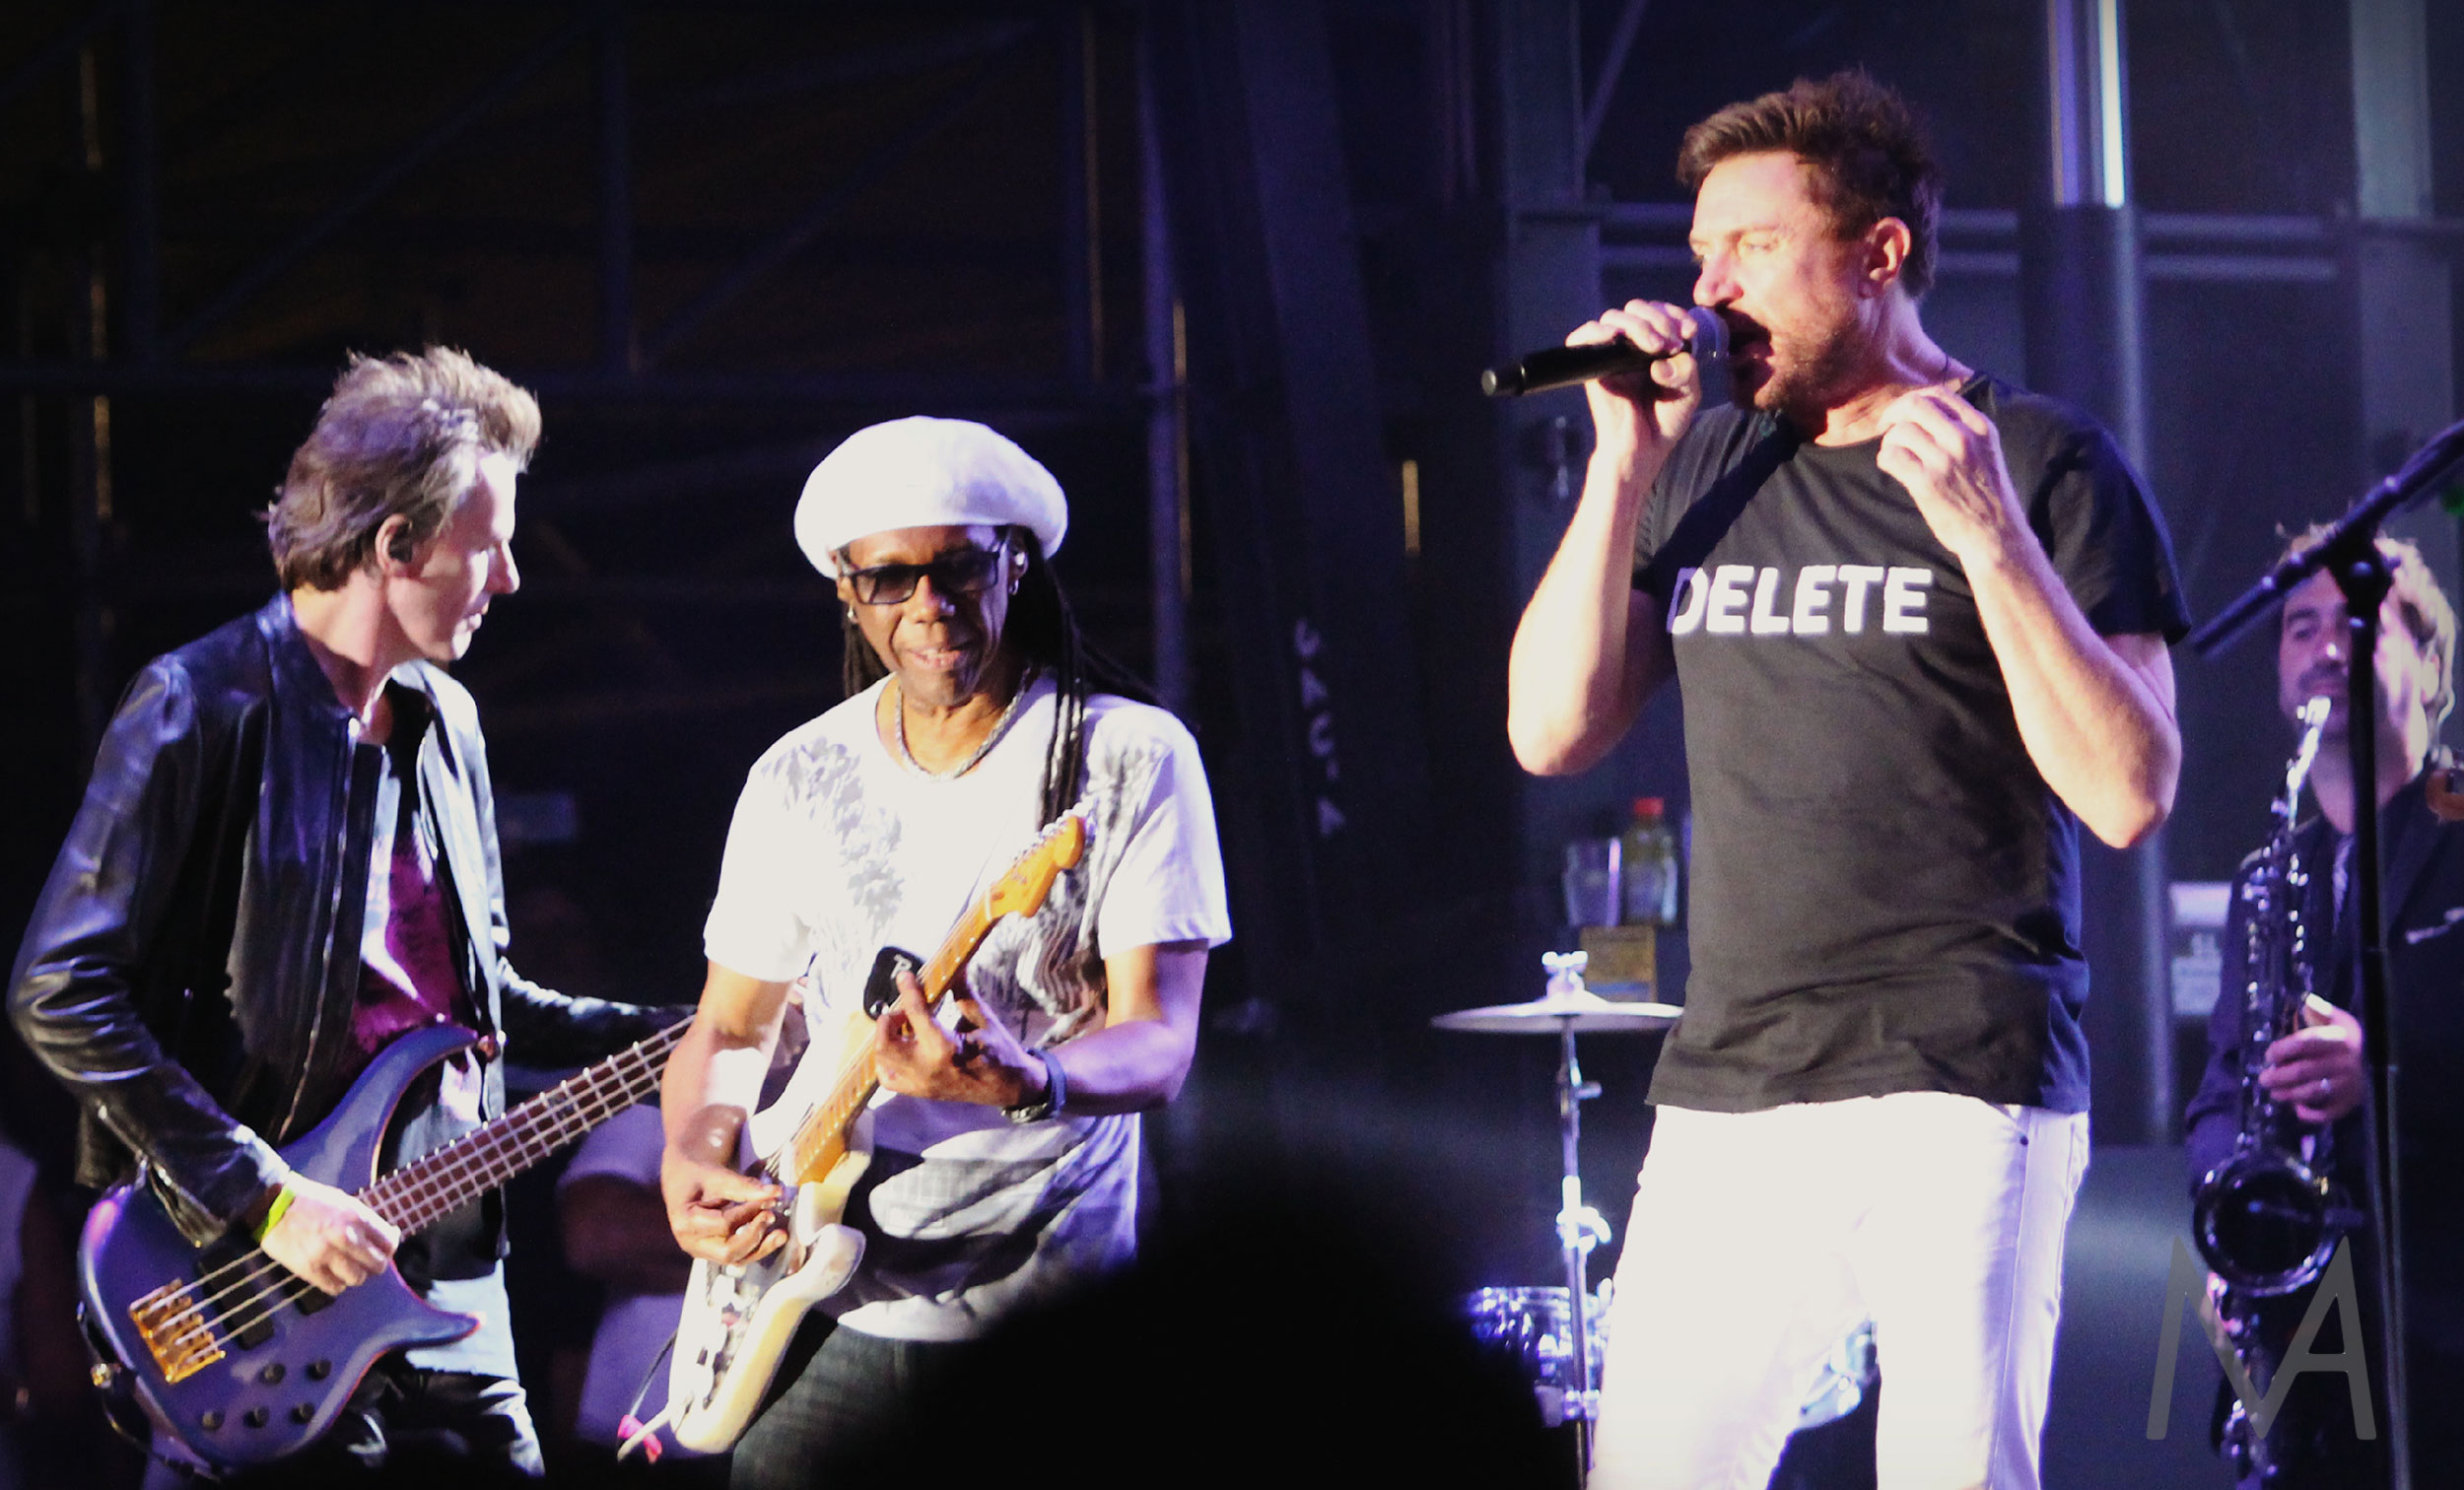 Nile Rodgers and Duran Duran